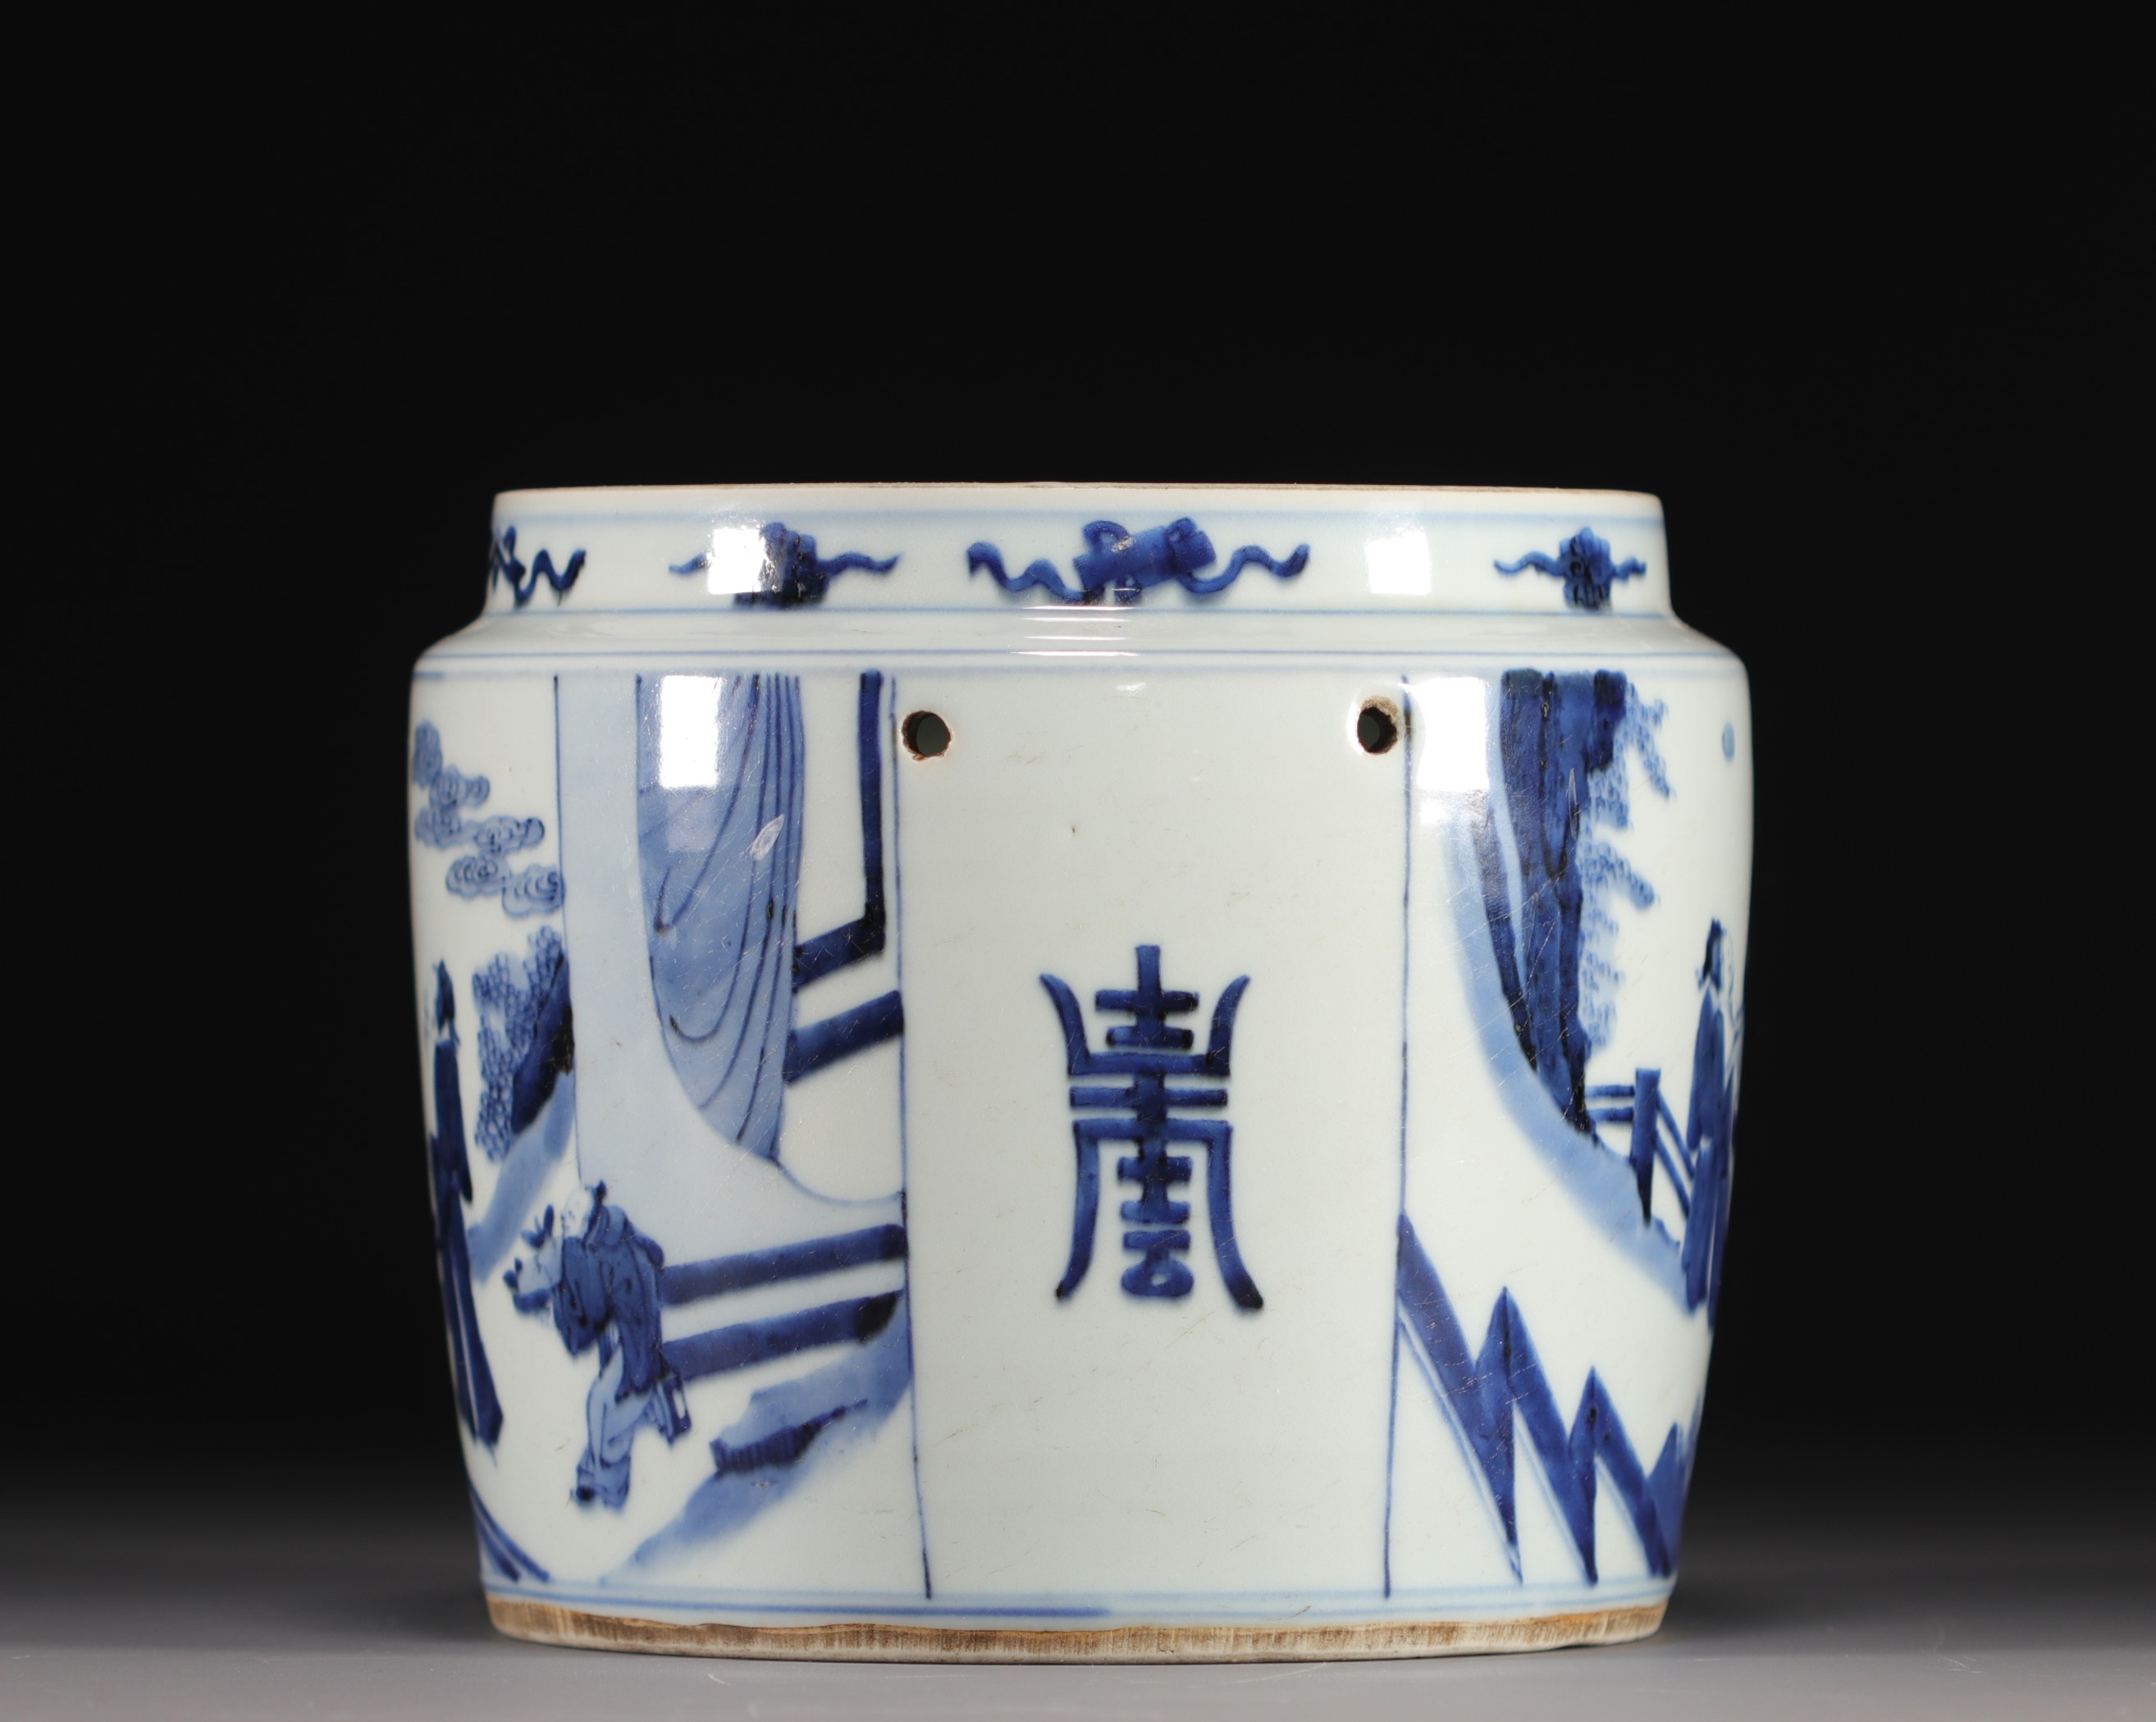 China - Perfume burner in blue porcelain with figures, 18th century. - Image 6 of 7